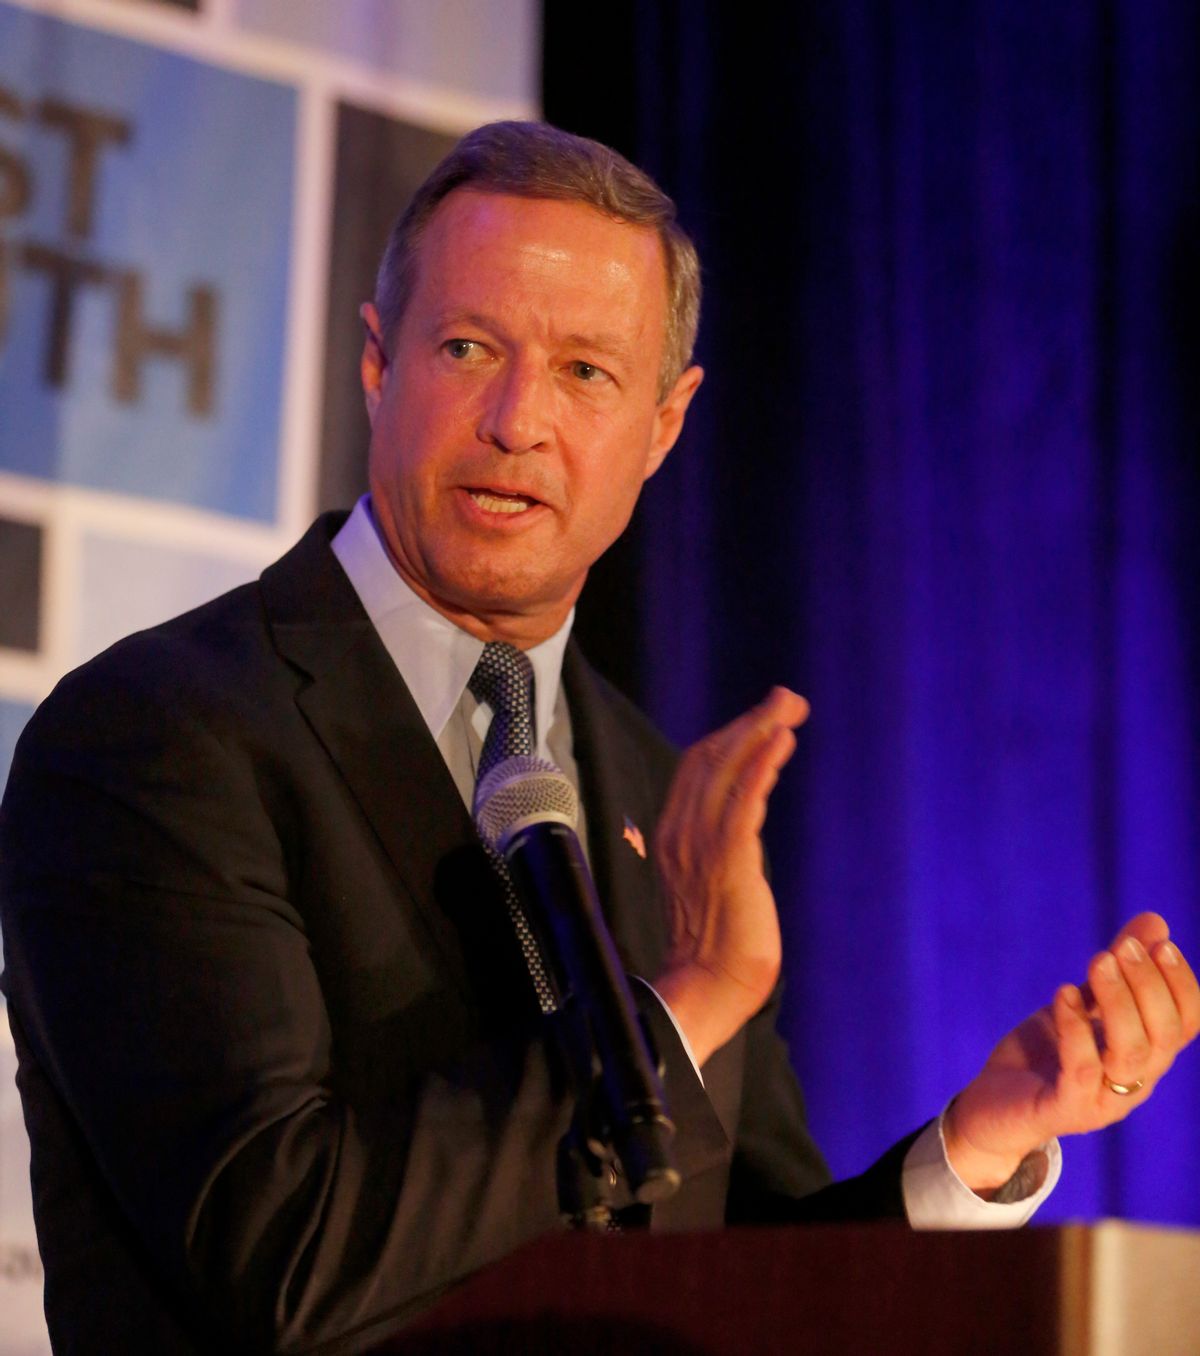 Democratic presidential candidate, former Maryland Gov. Martin O'Malley, speaks during the First in the South Dinner at the Charleston Mariott Saturday, Jan. 16, 2016, in Charleston, S.C. (AP Photo/Mic Smith) (AP)